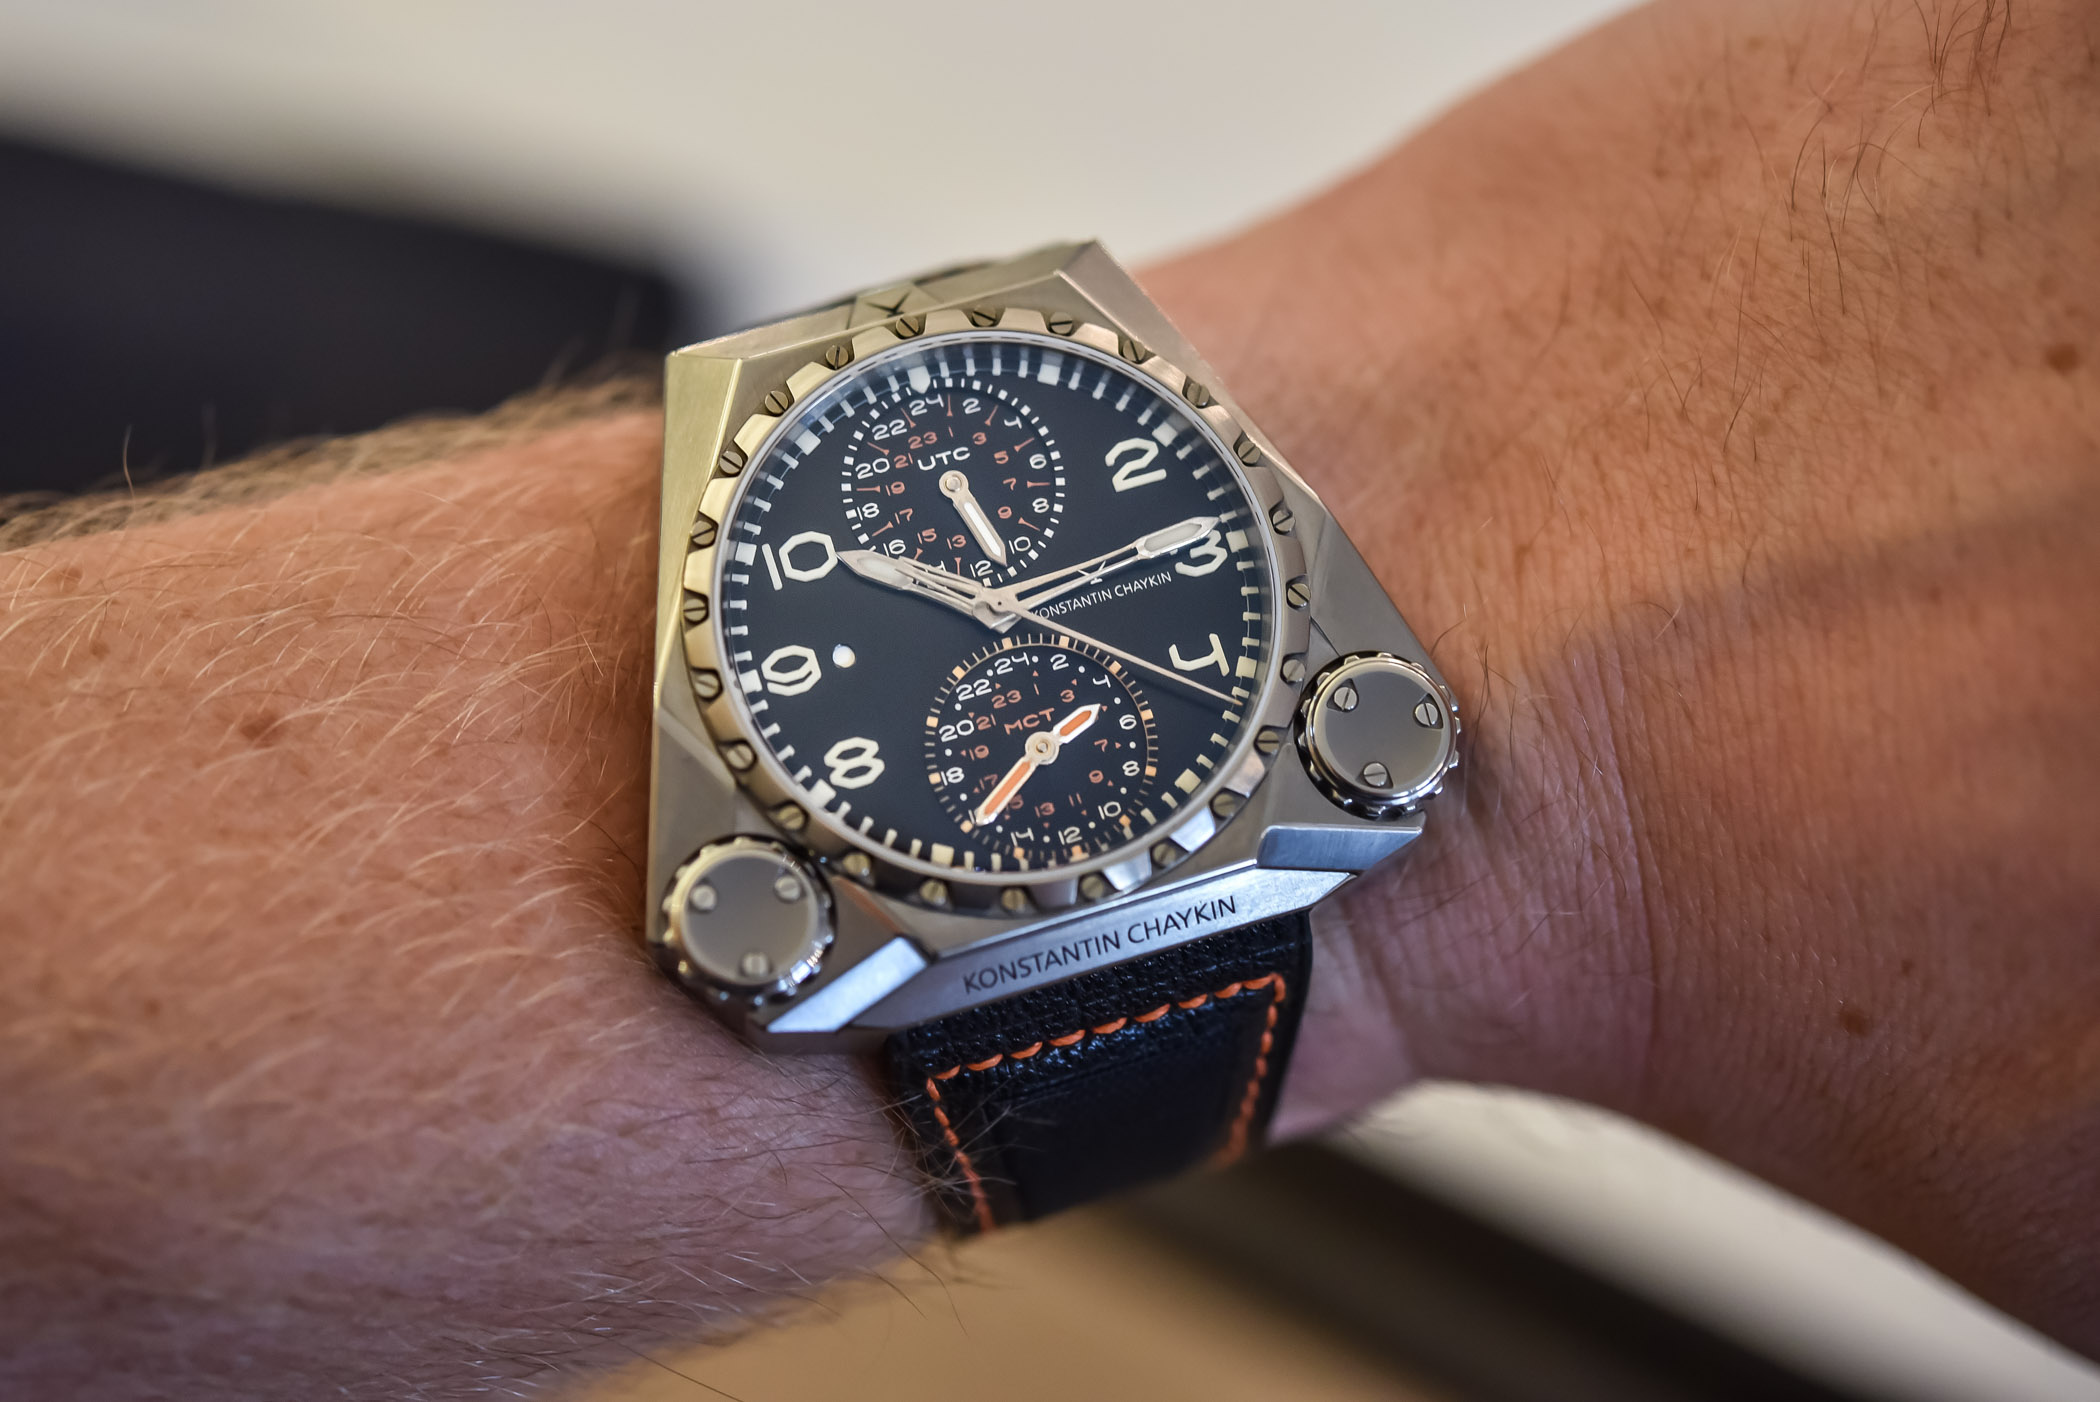 Review Konstantin Chaykin Mars Conqueror MK3, The Watch Made For The Exploration of Mars